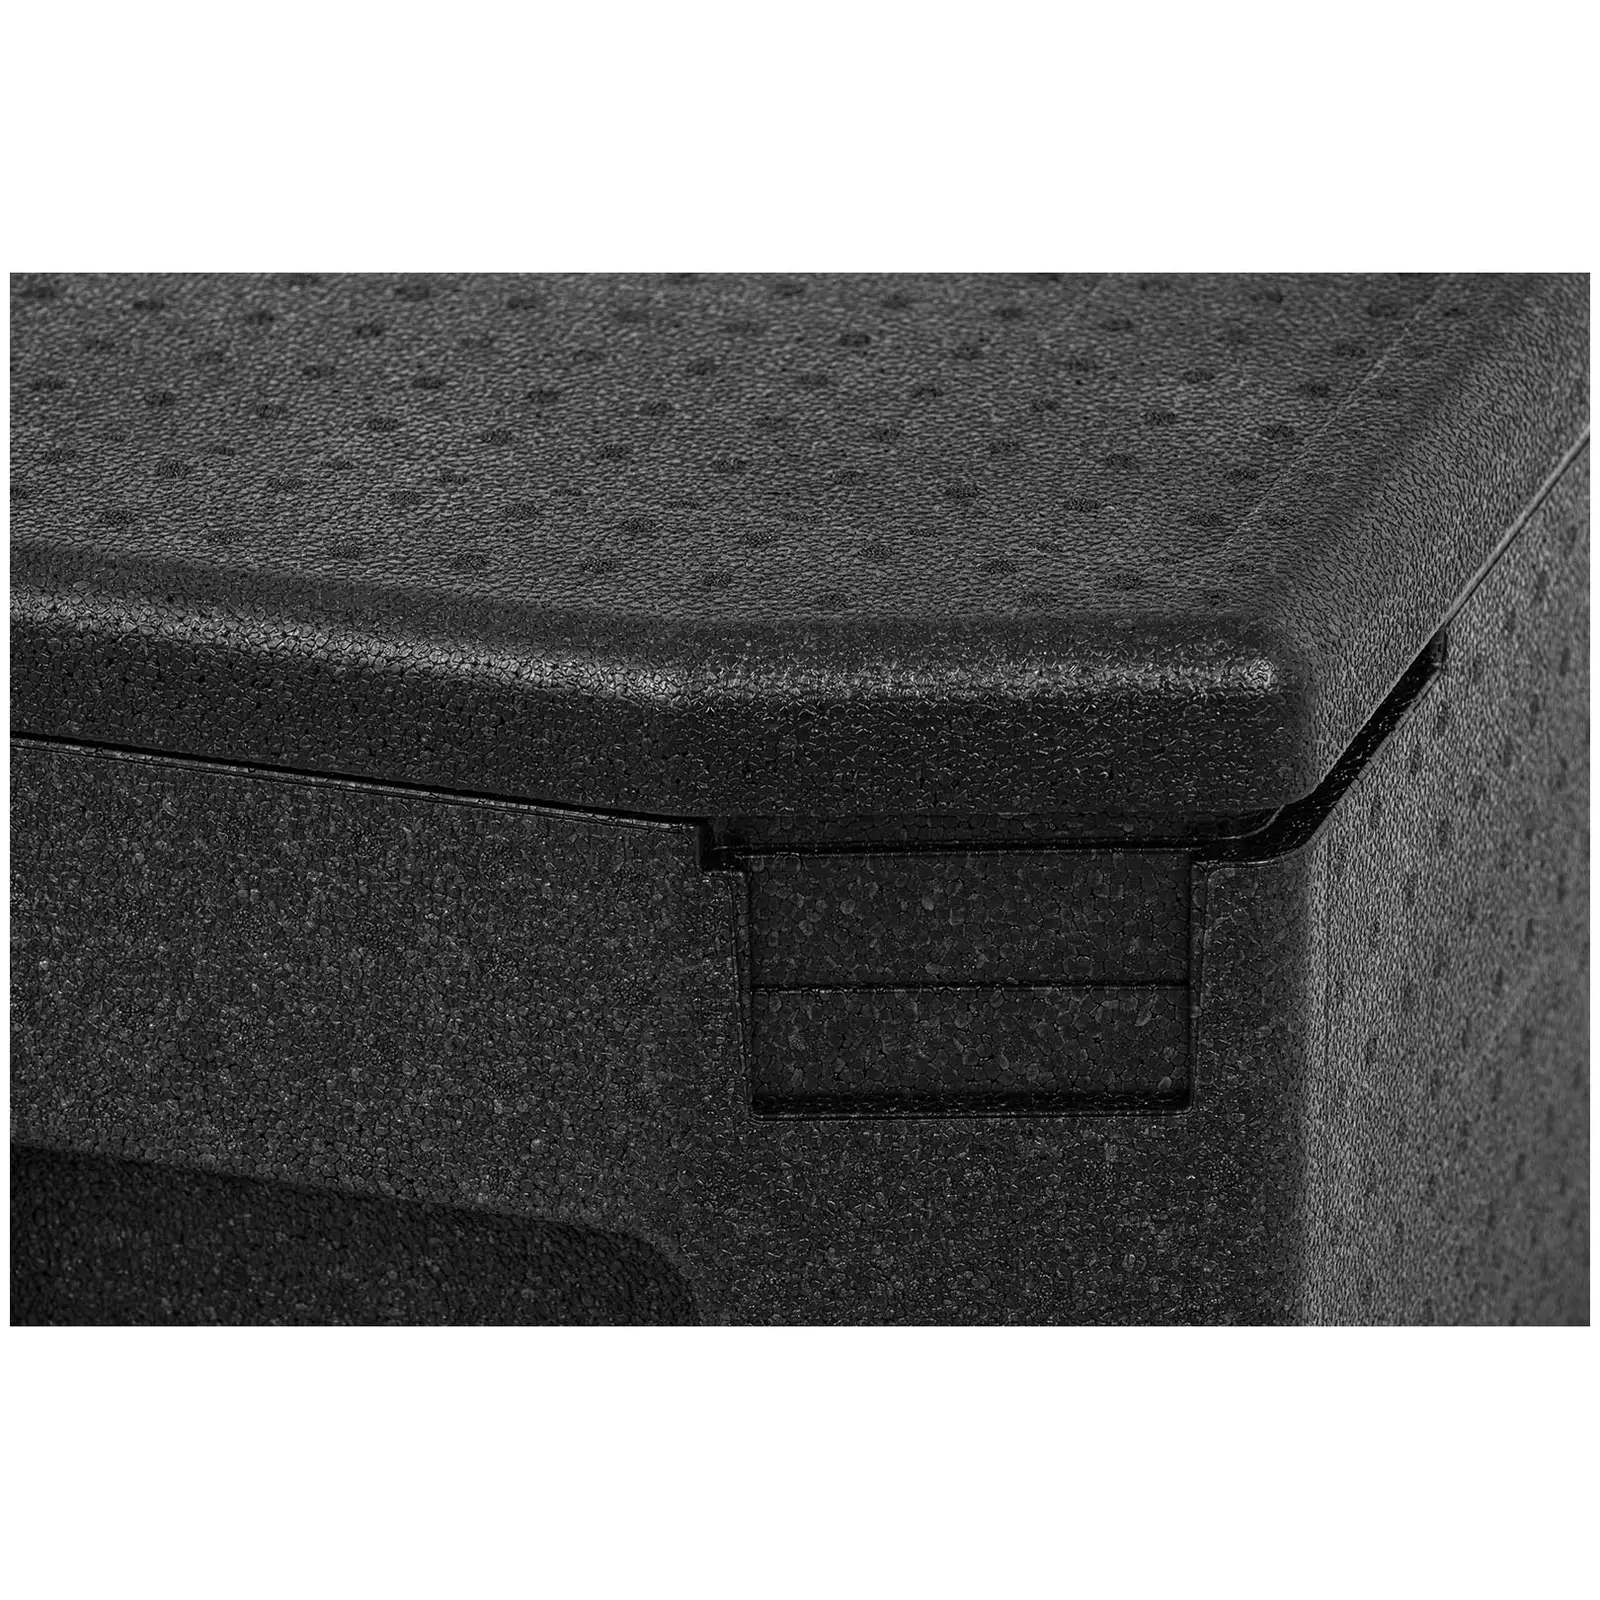 Thermobox - GN 1/1 container (20 cm deep) - XXL handles